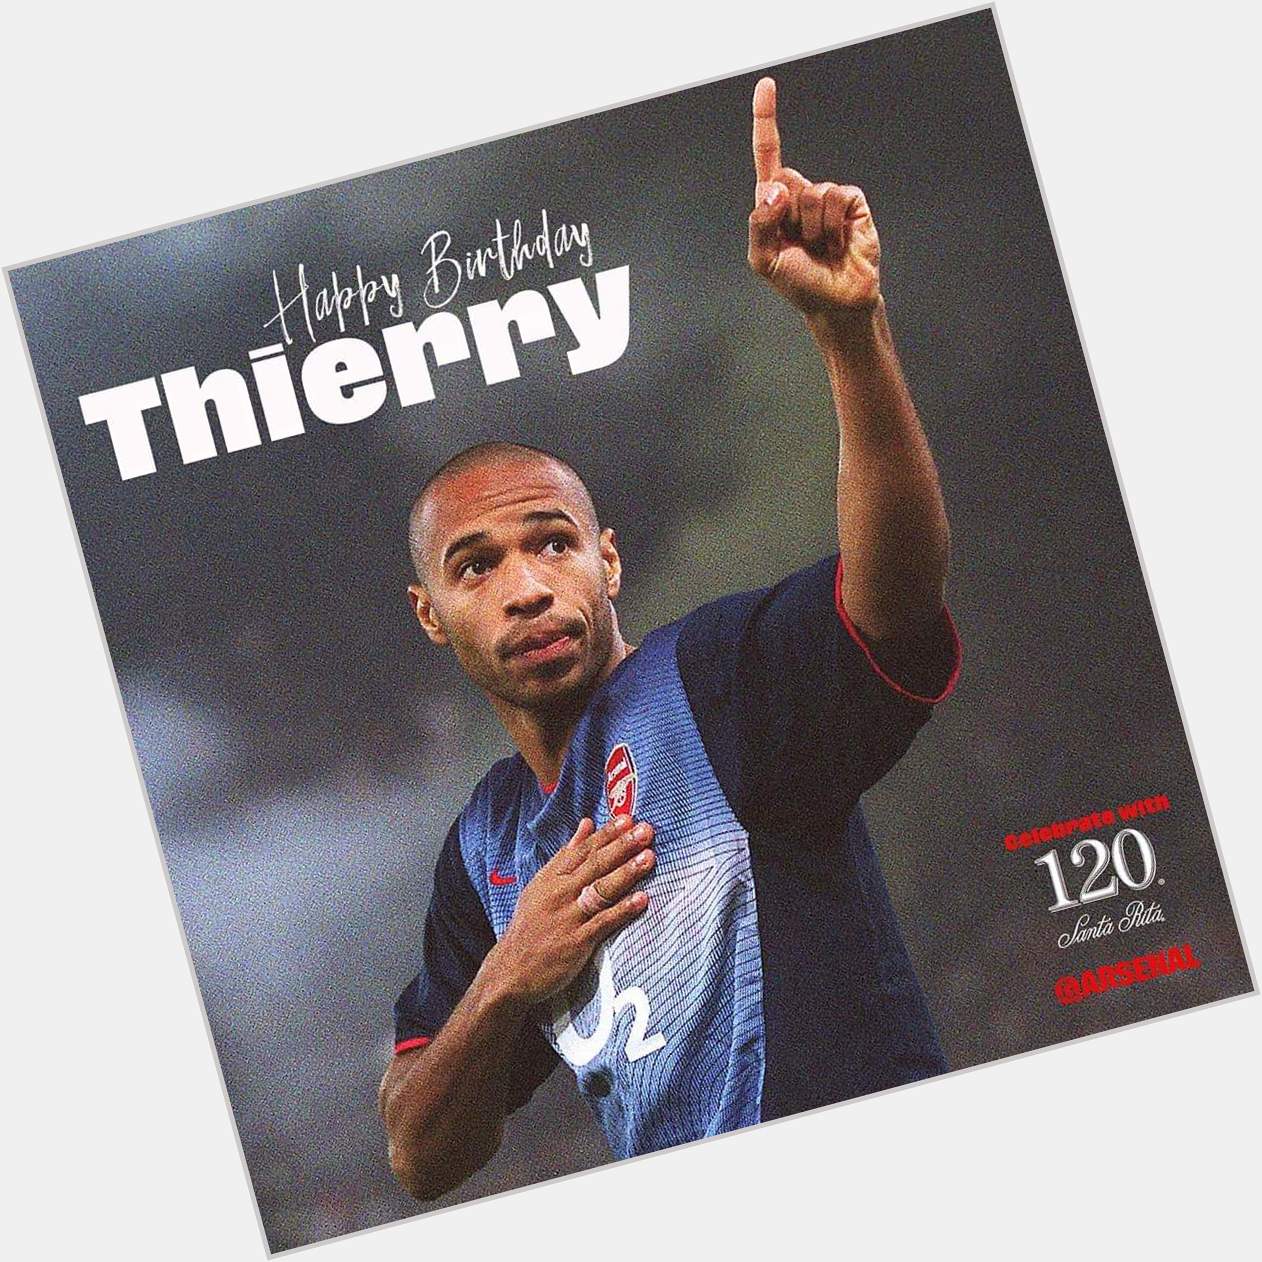 Happy birthday to The King, Thierry Henry   My hero   